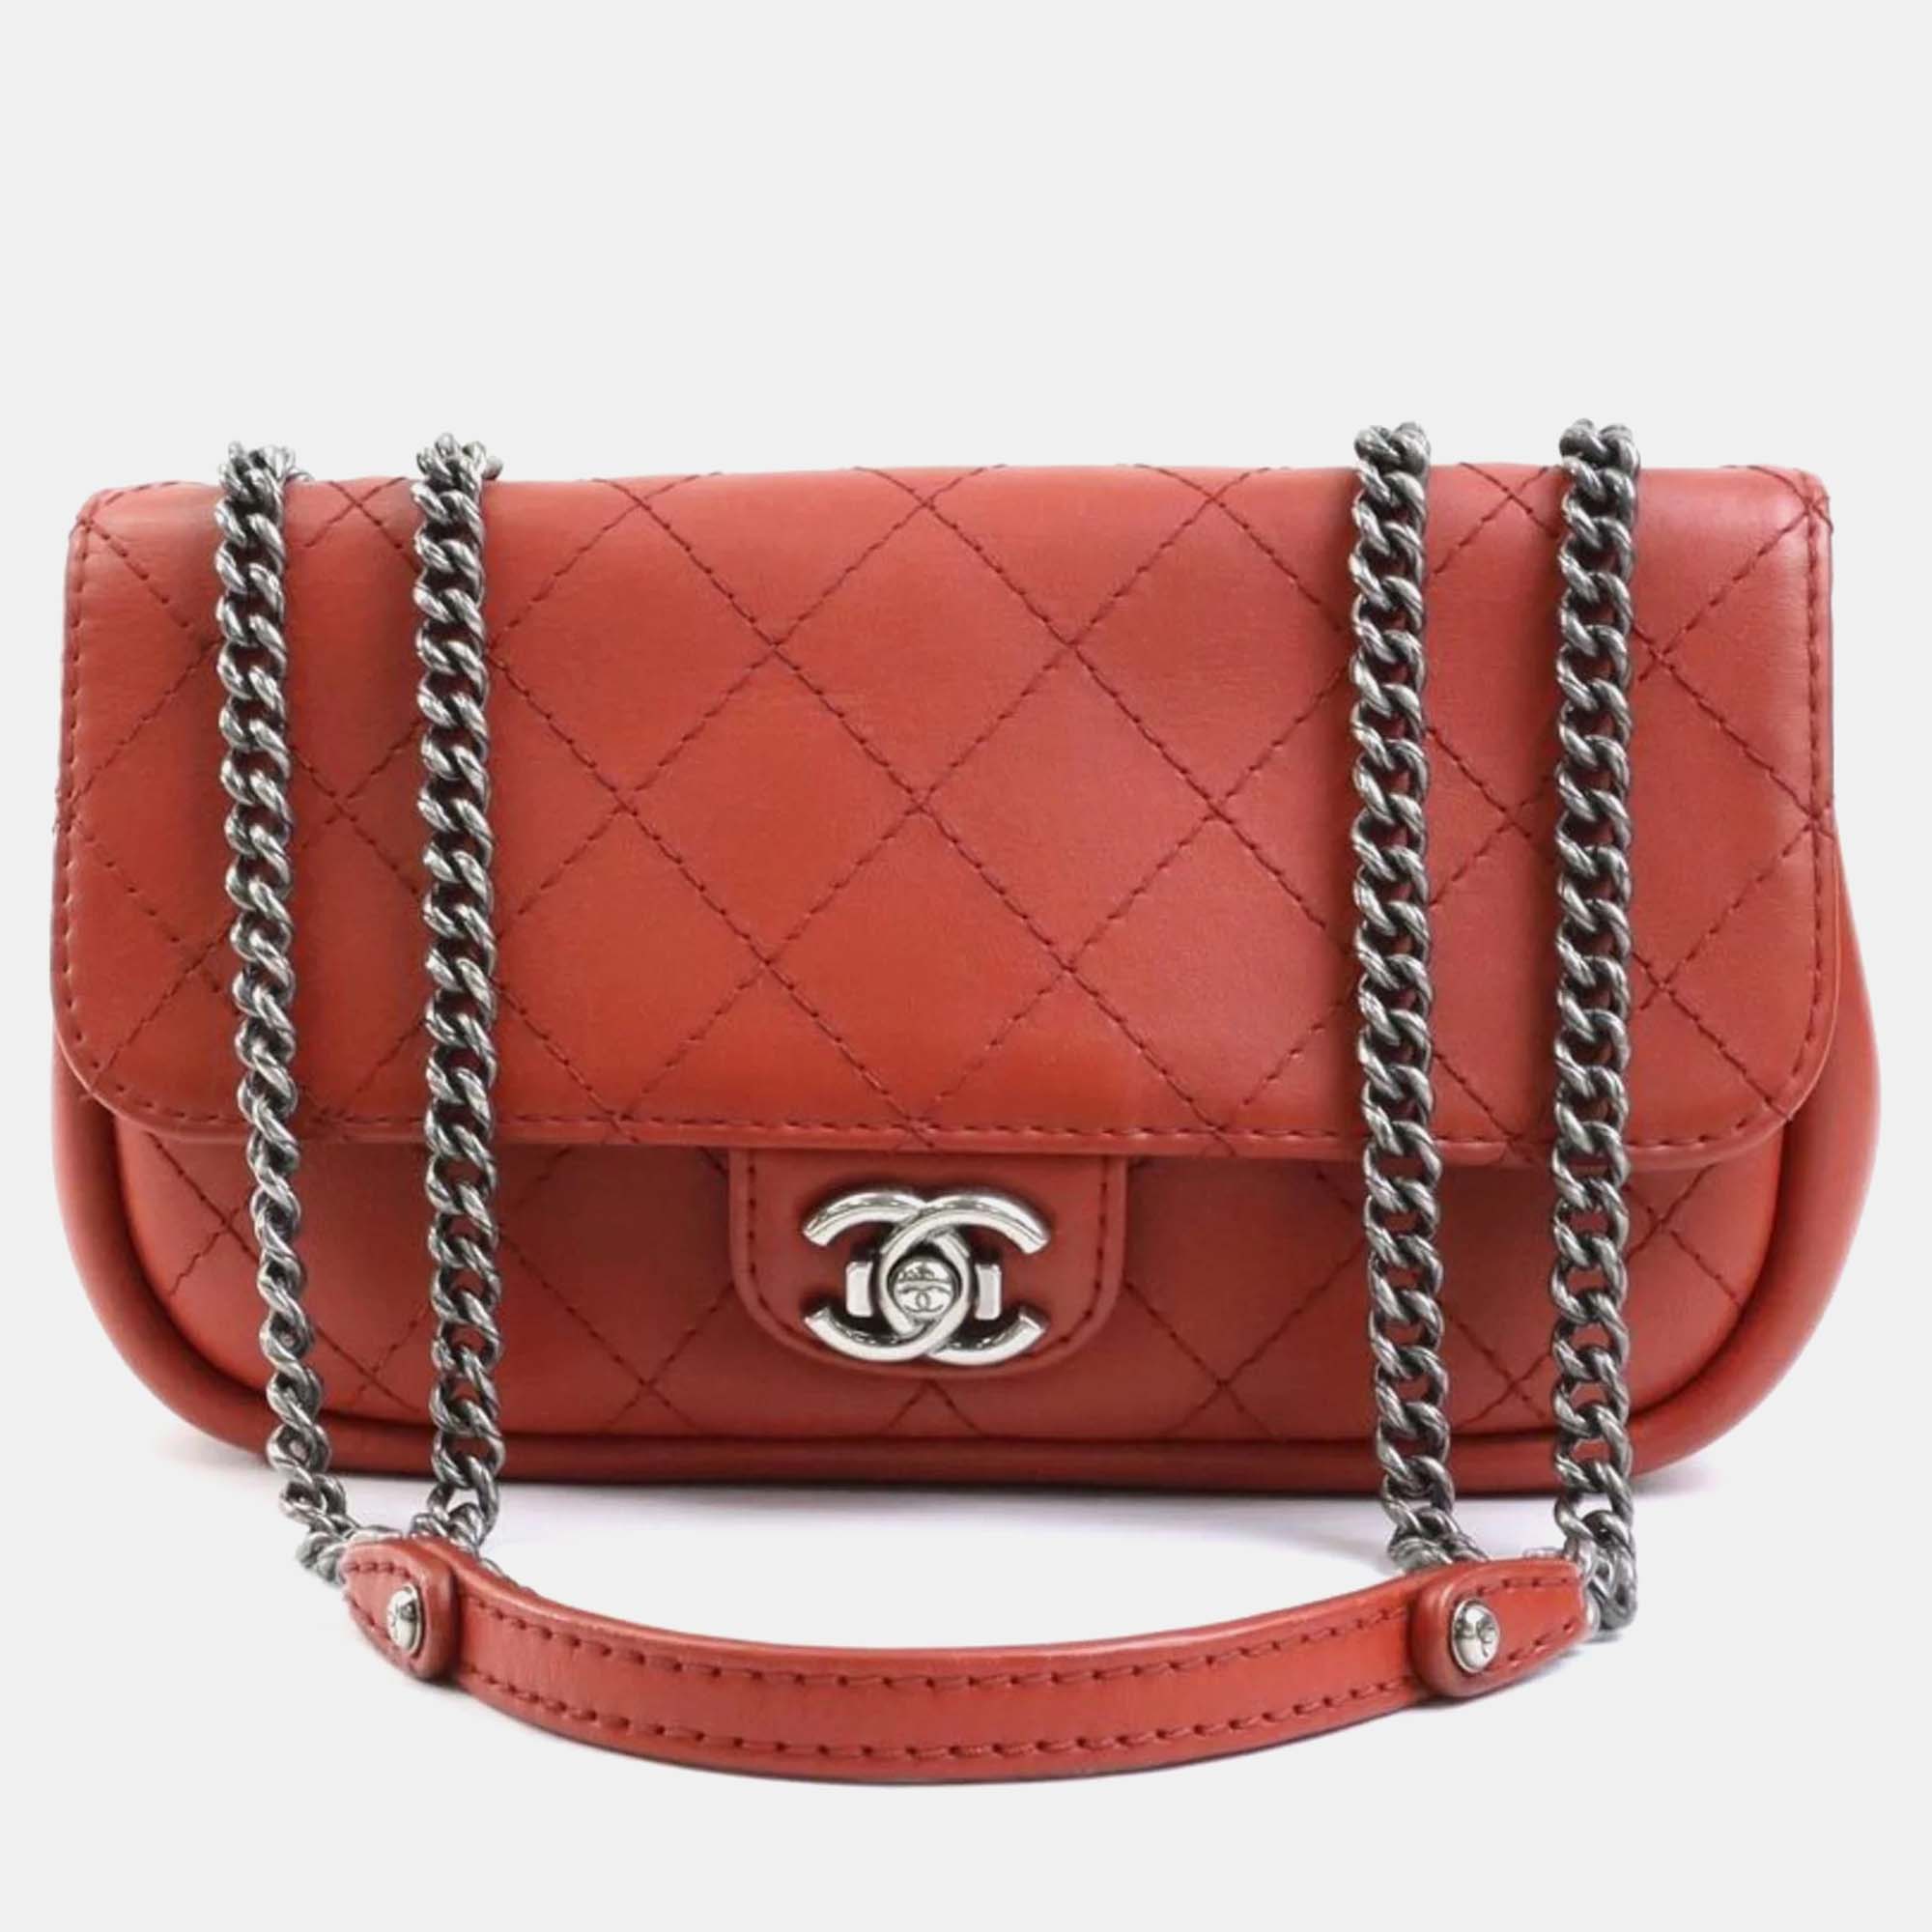 Chanel red quilted leather single flap bag